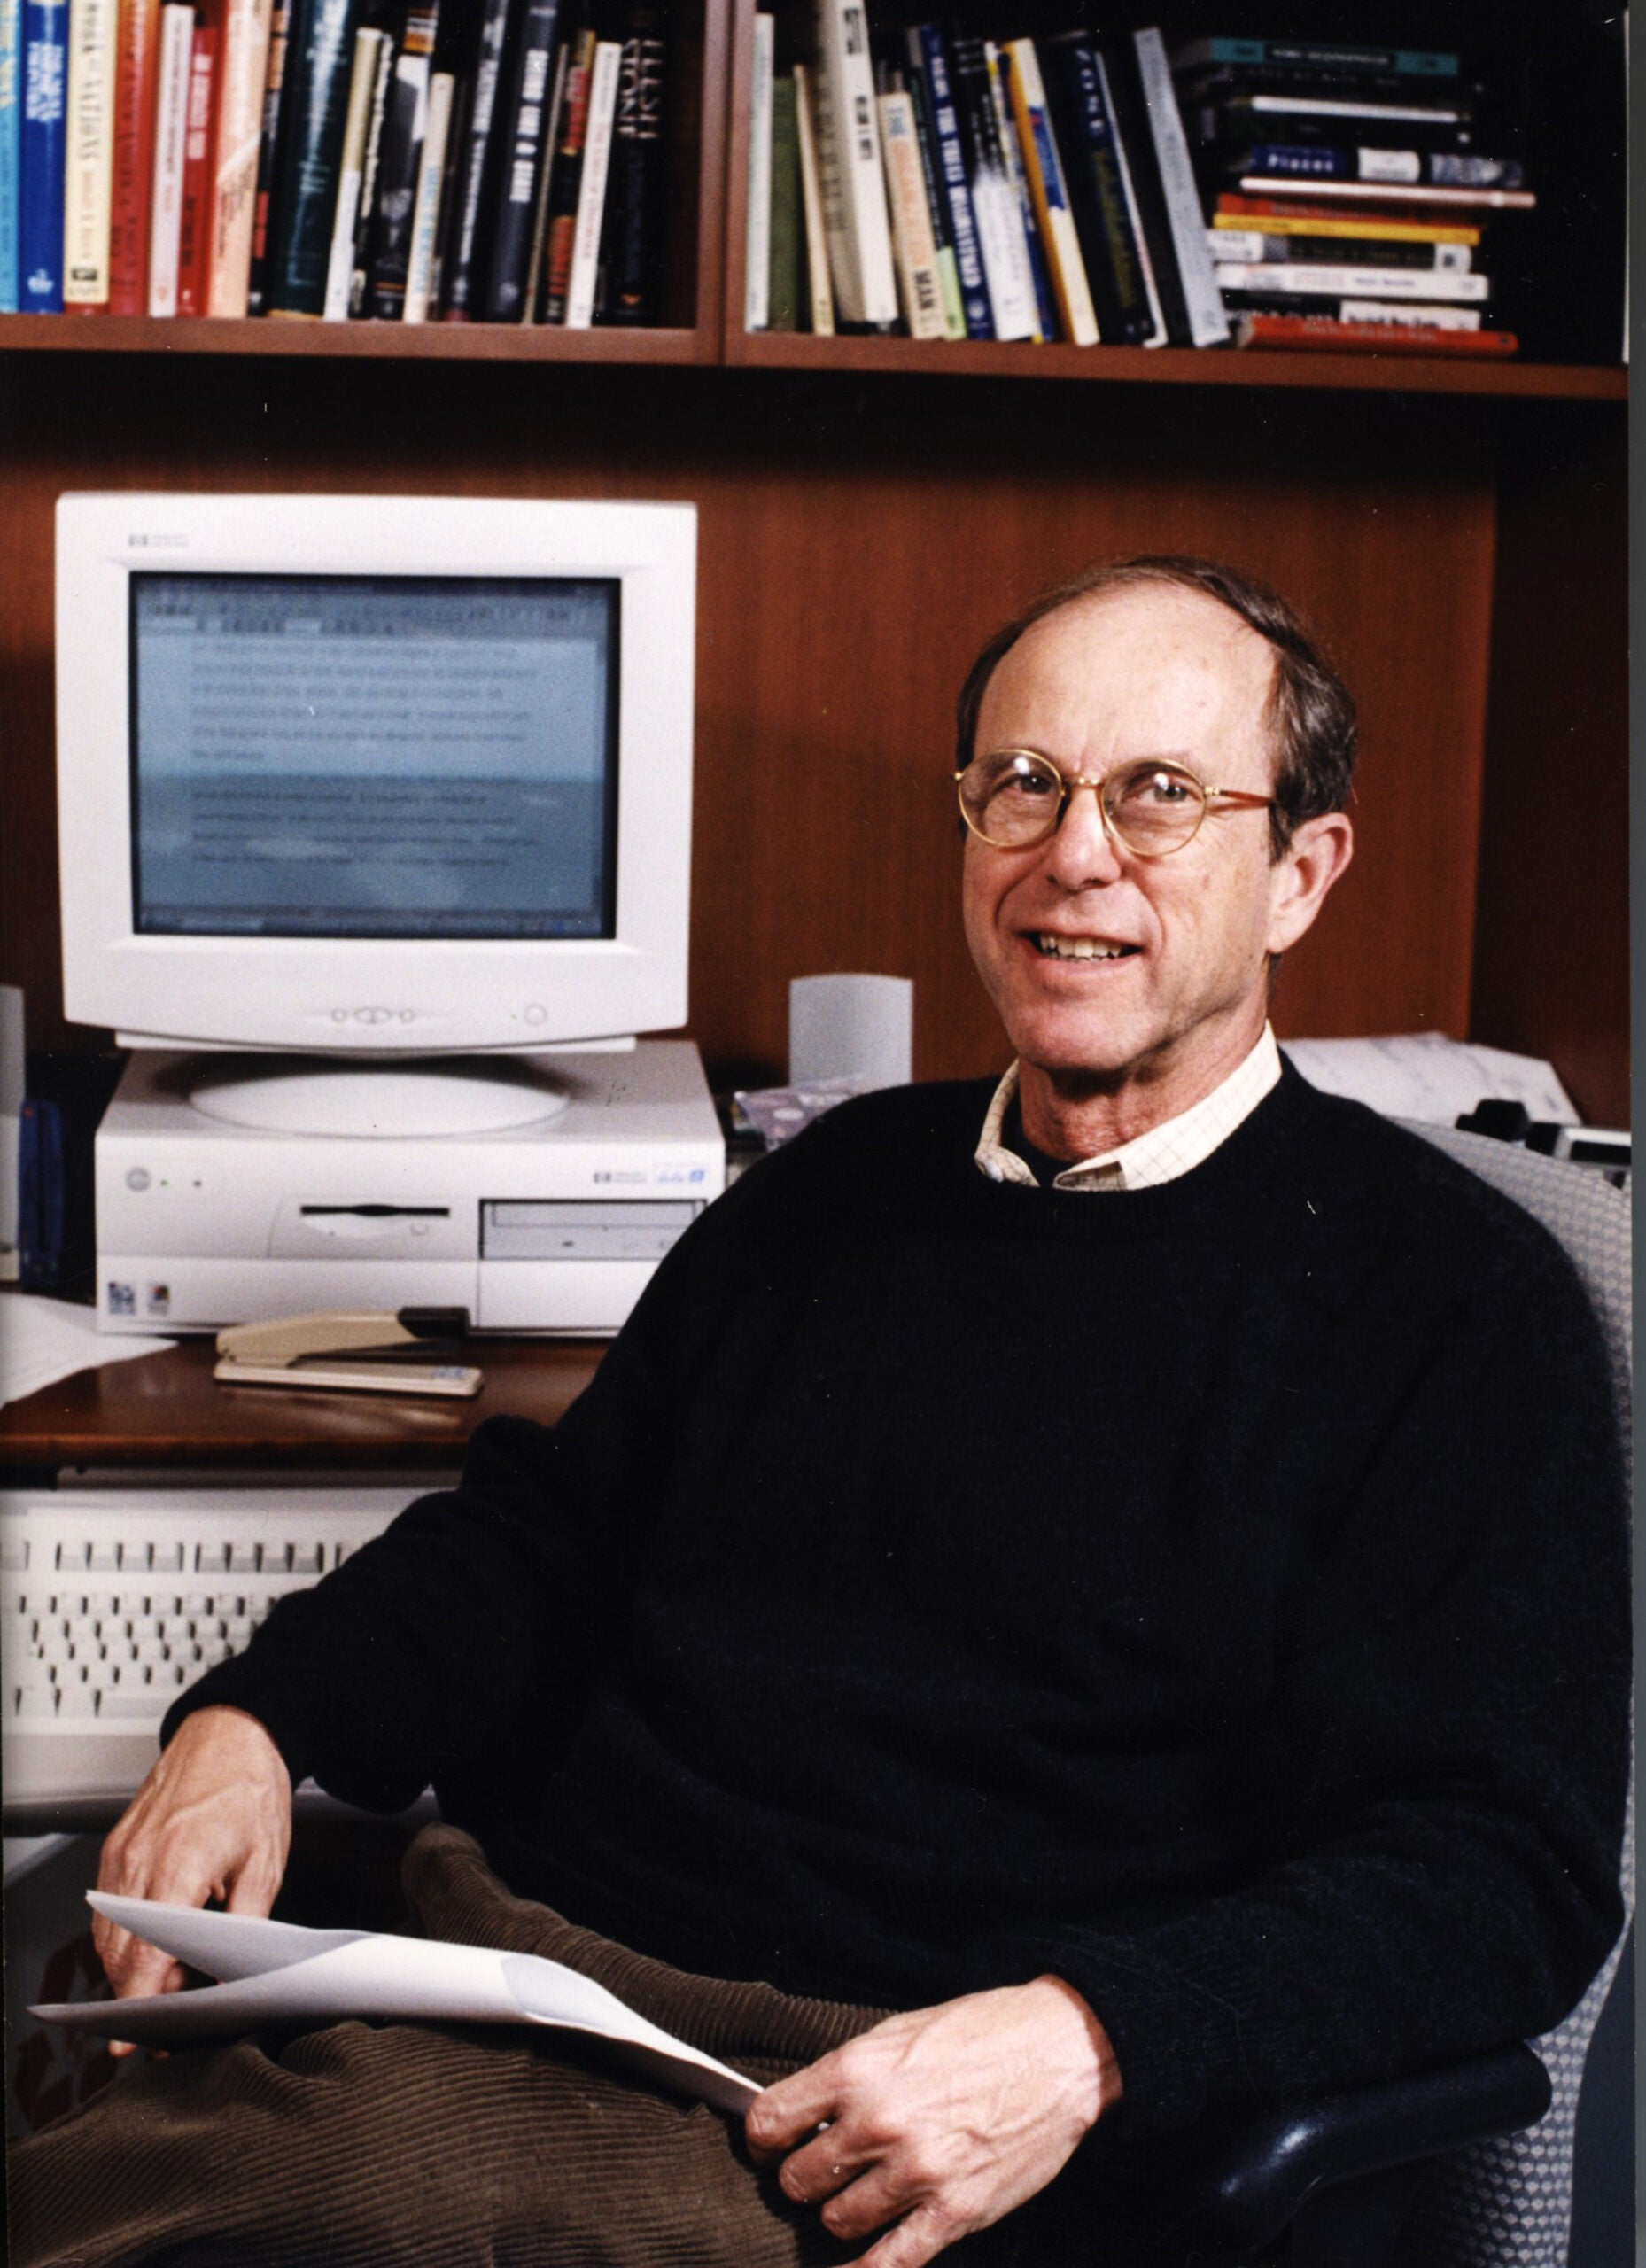 A man sitting in front of a computer in his office